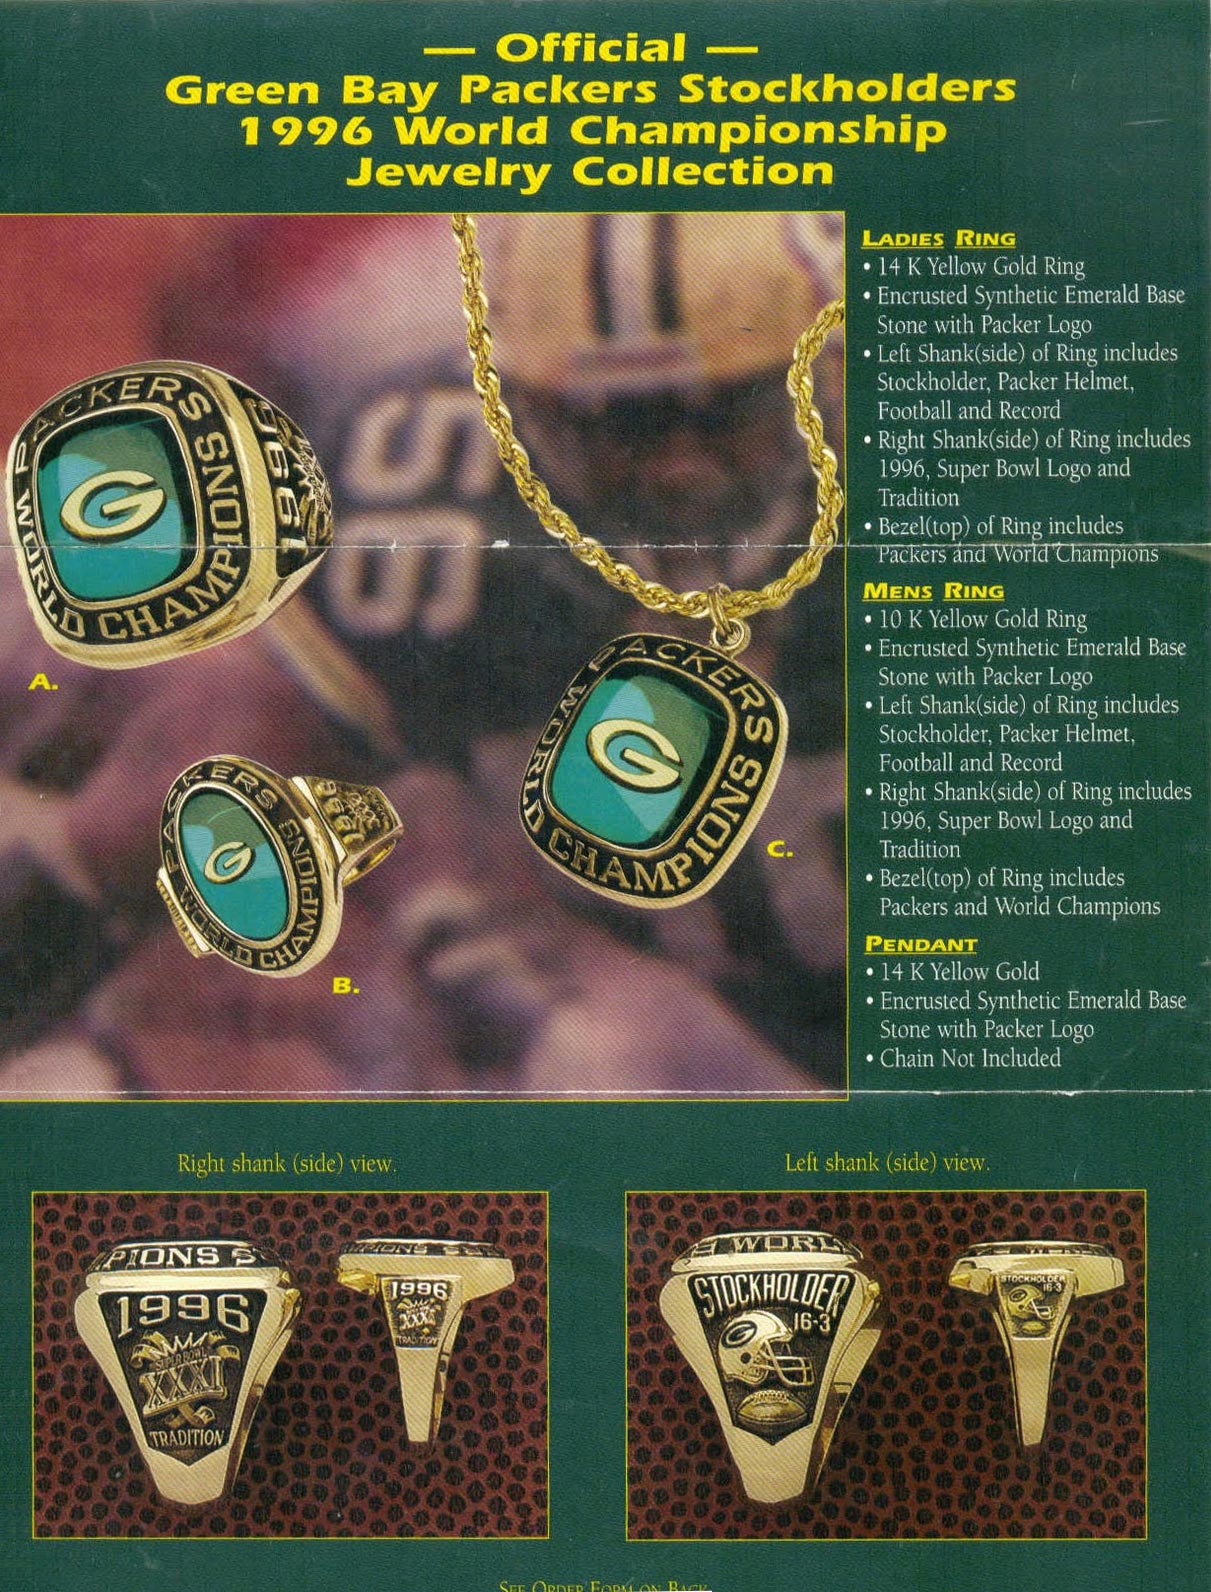 The Wearing Of the Green (and Gold): 1996 Shareholder Rings